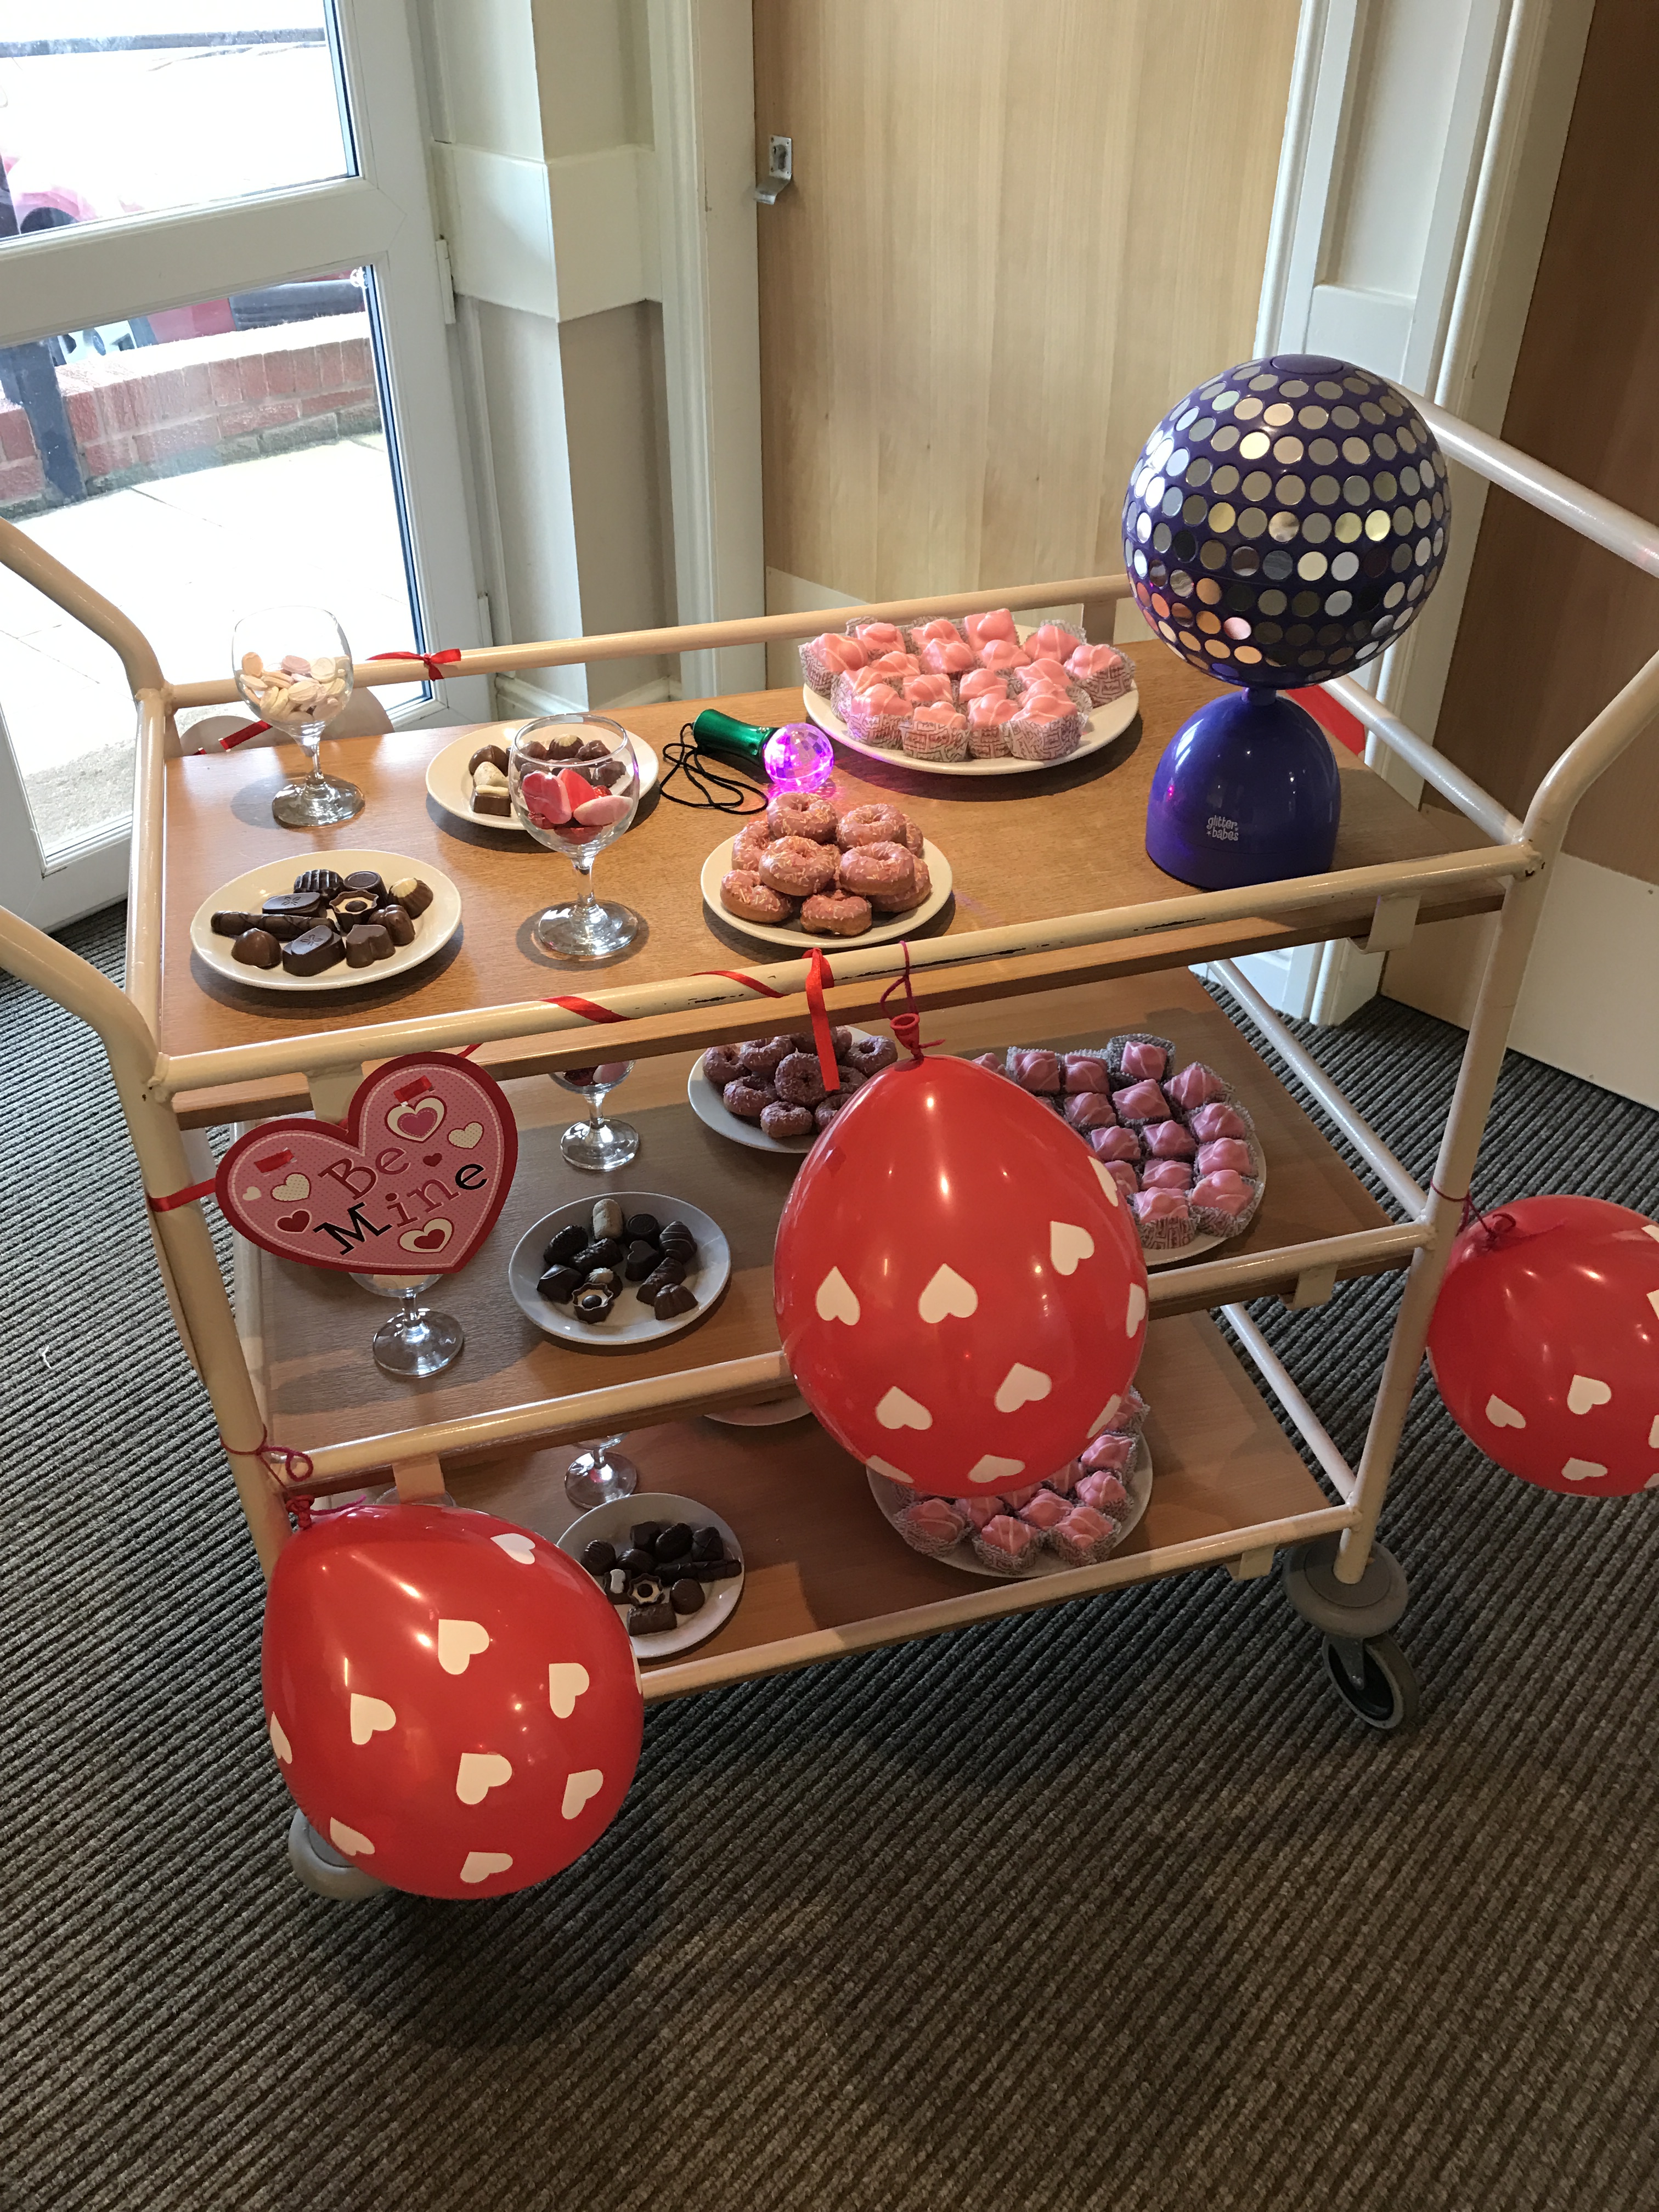 Valentines treats on The Love Trolley: Key Healthcare is dedicated to caring for elderly residents in safe. We have multiple dementia care homes including our care home middlesbrough, our care home St. Helen and care home saltburn. We excel in monitoring and improving care levels.